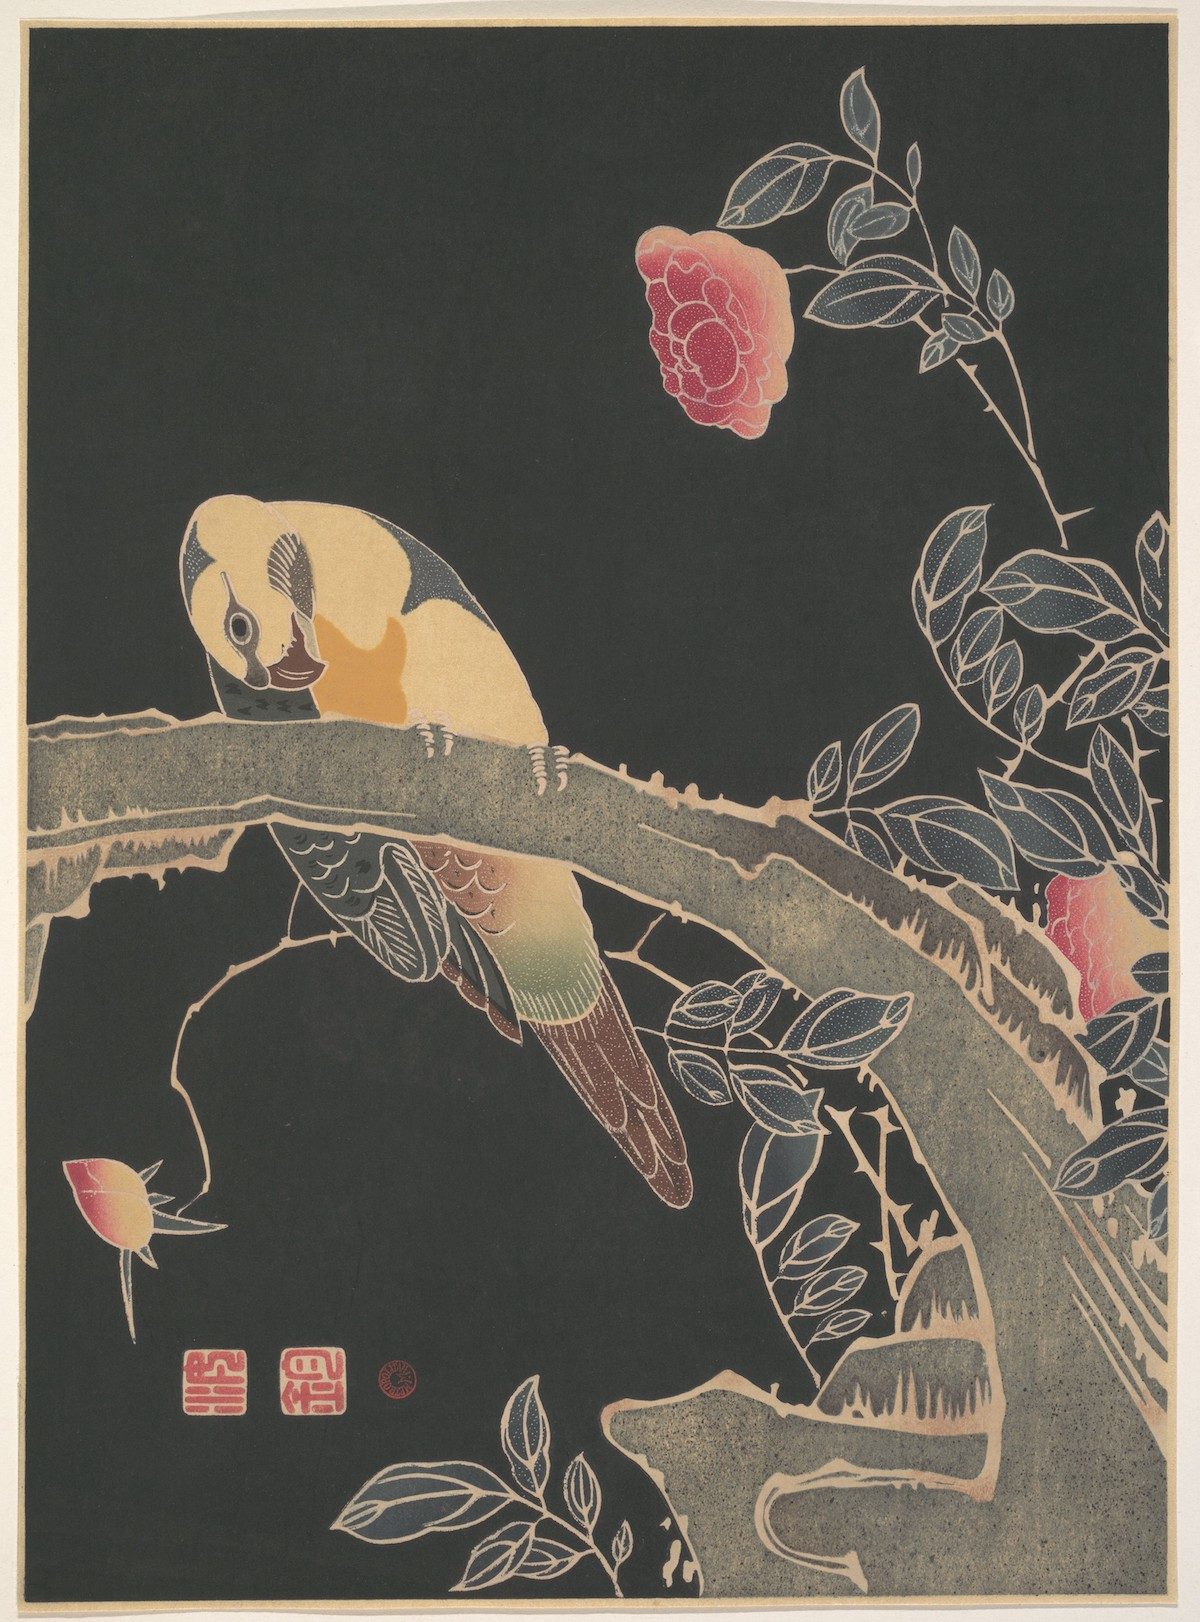 Parrot on the Branch of a Flowering Rose Bush (ca. 1900) illustration by Ito Jakuchu.